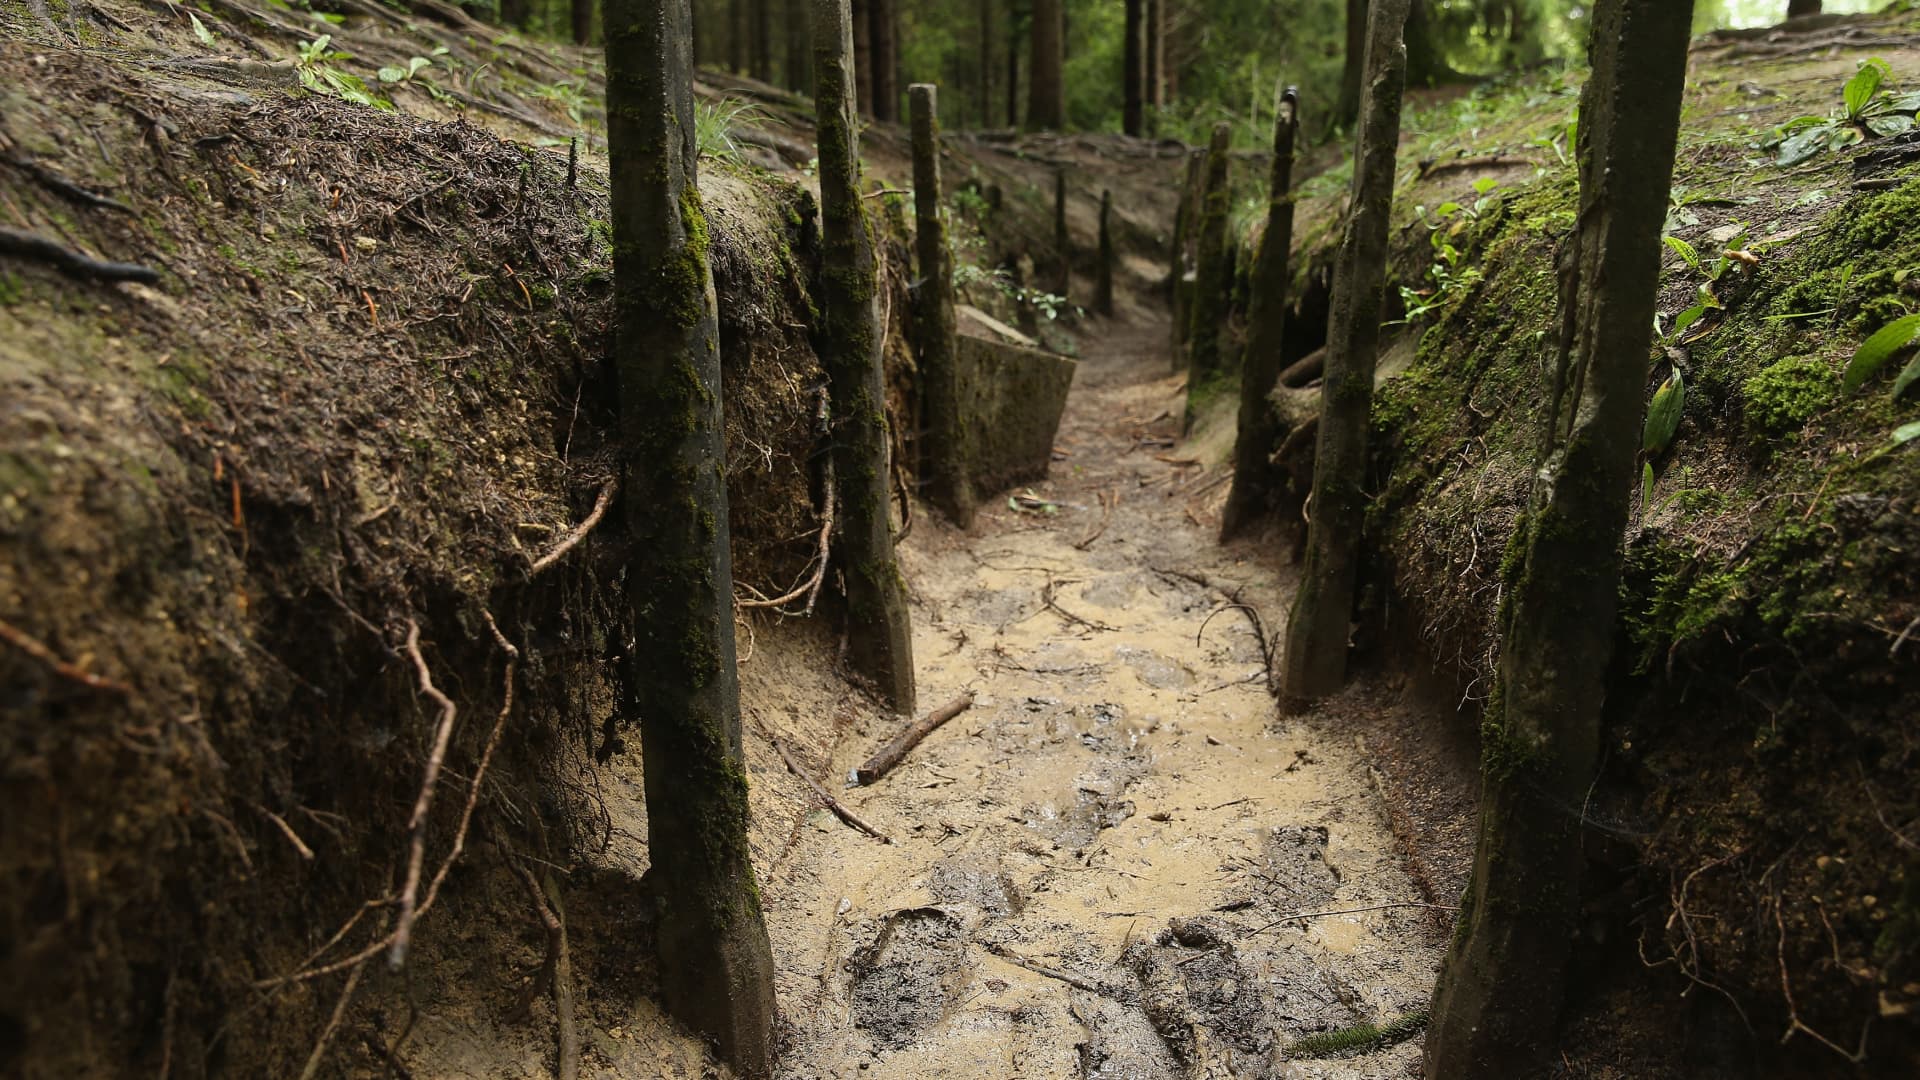 Footsteps from recent visitors are visible among the remains of a former French communications and supply trench from the World War I Battle of Verdun on August 27, 2014 near Verdun, France.